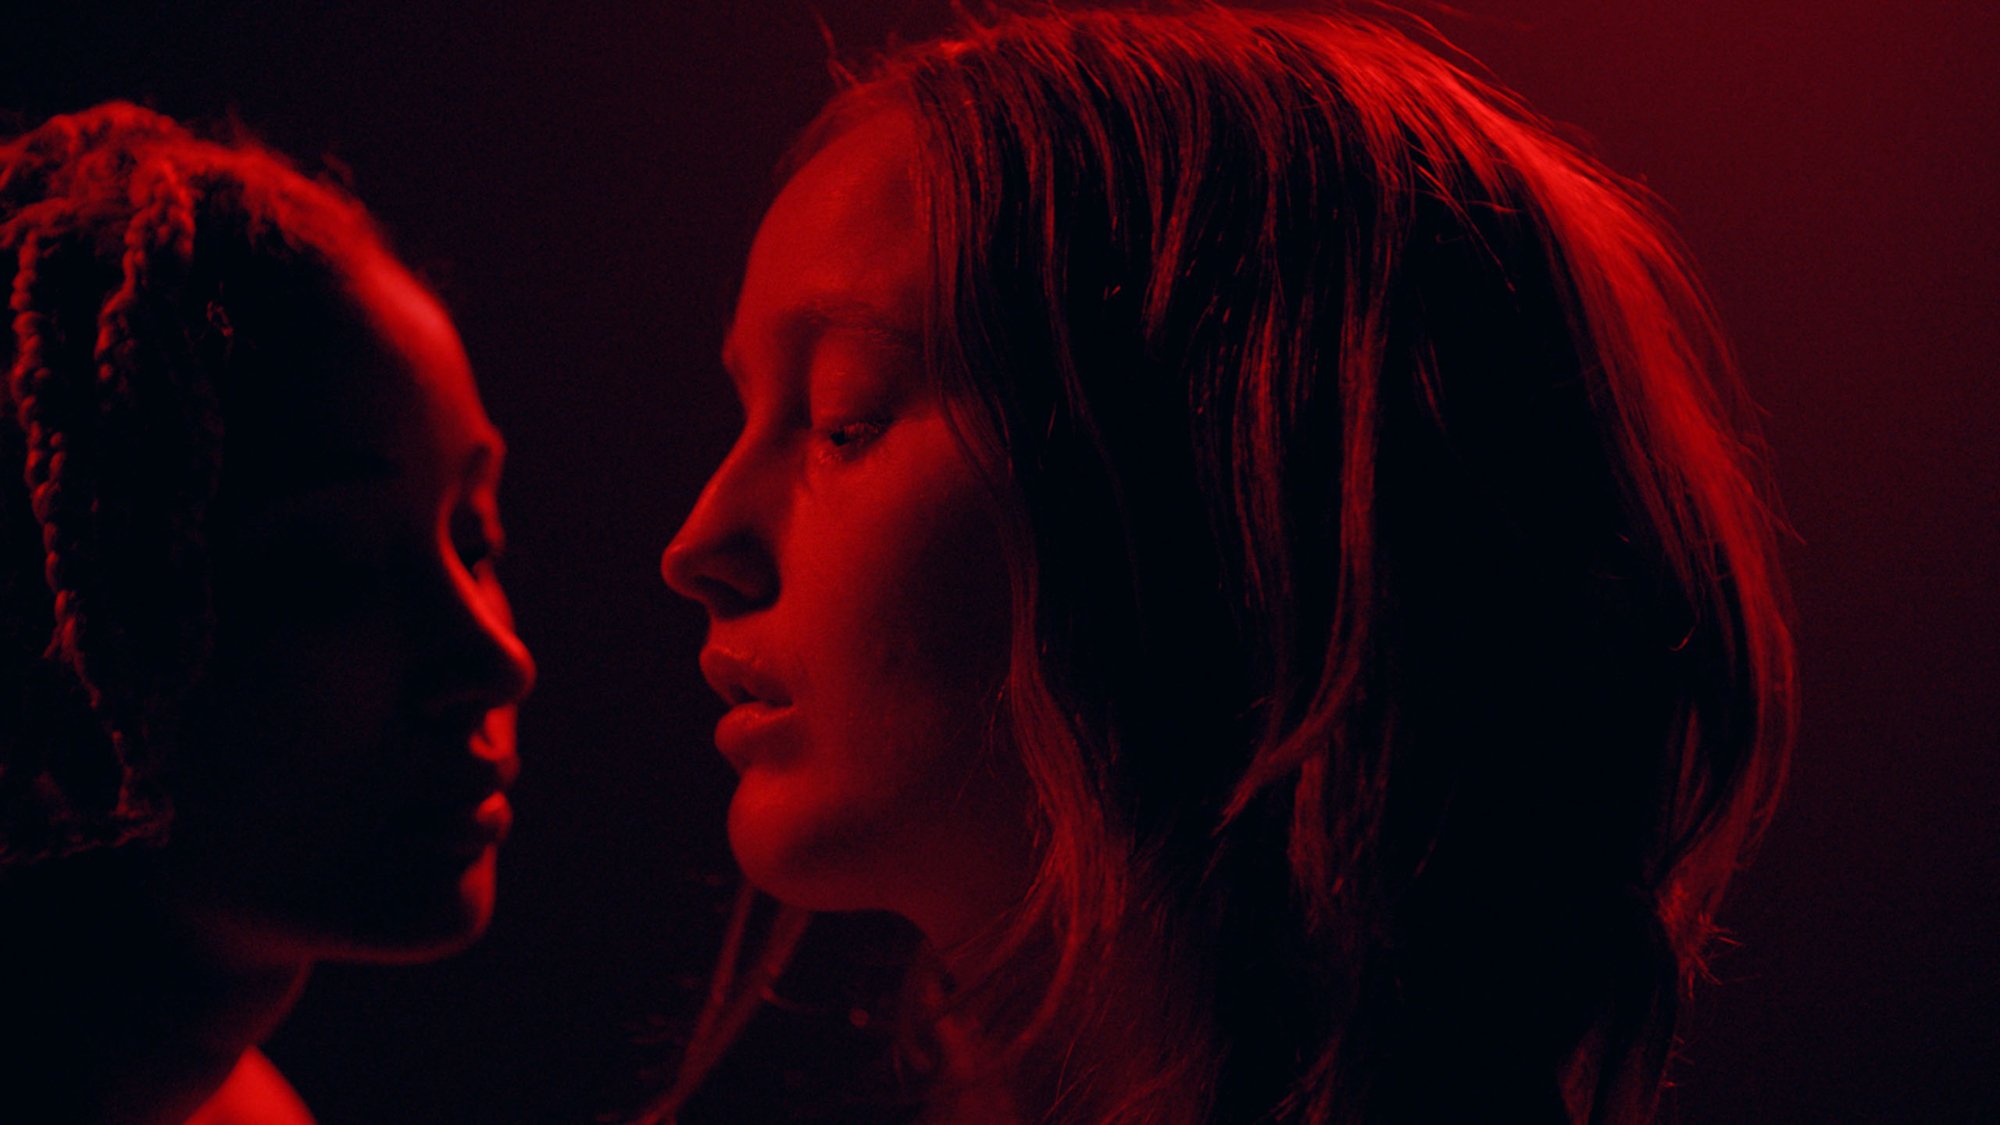 'My Animal' Amandla Stenberg as Jonny and Bobbi Salvör Menuez as Heather with their faces together in red lighting